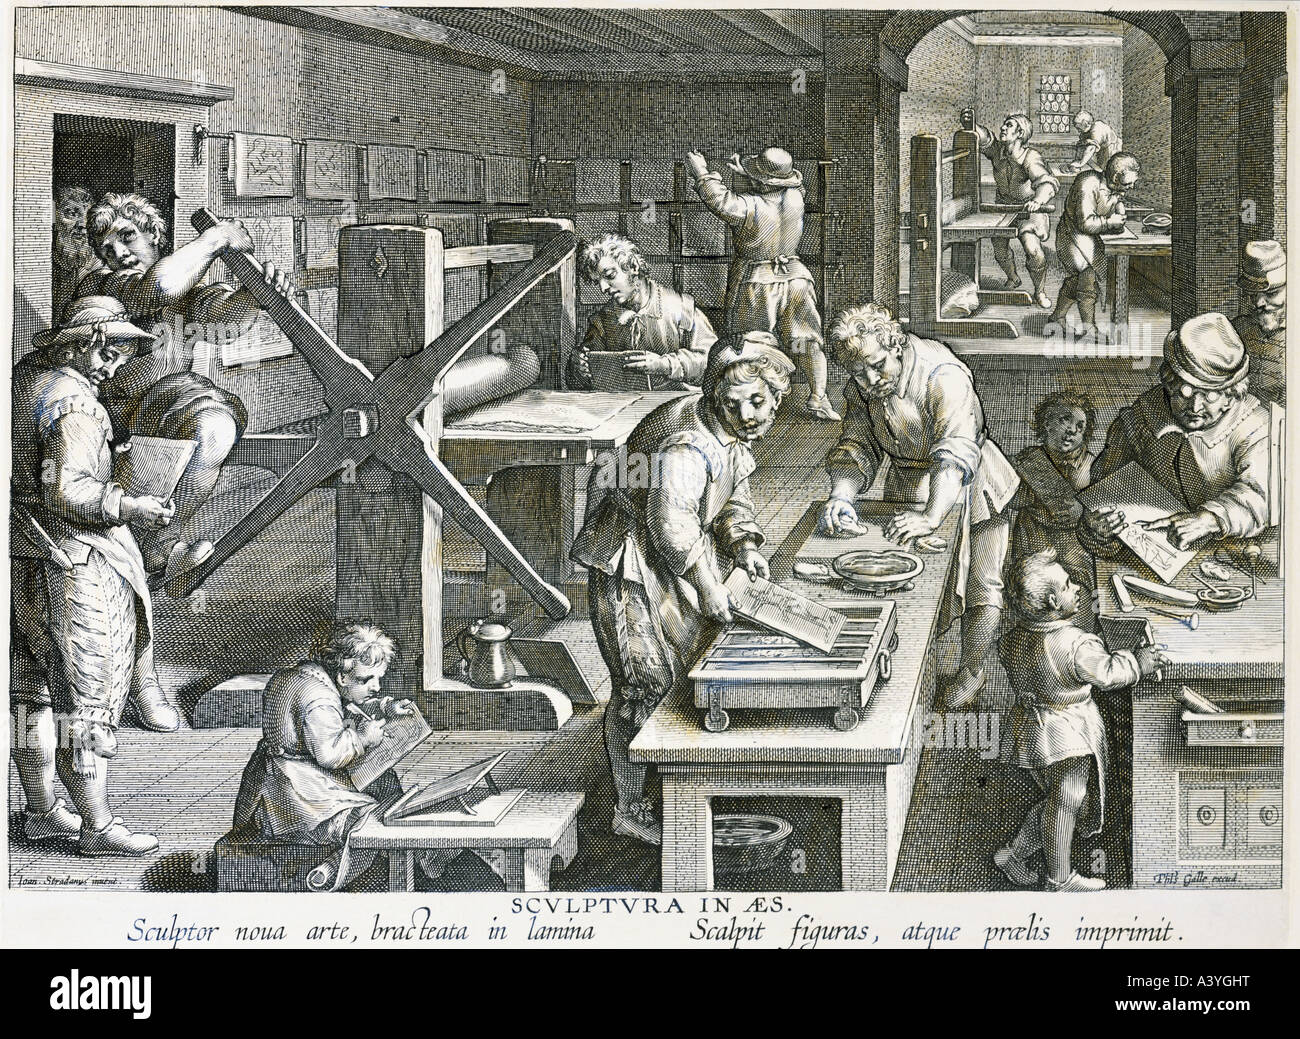 technics, printing, engraver at studio with printing presses, engraving, by Johannes Stradanus (1523 - 1605), by Theodor Galle, from 'Nova Reperta' series, circa 1580, private collection, , Artist's Copyright has not to be cleared Stock Photo